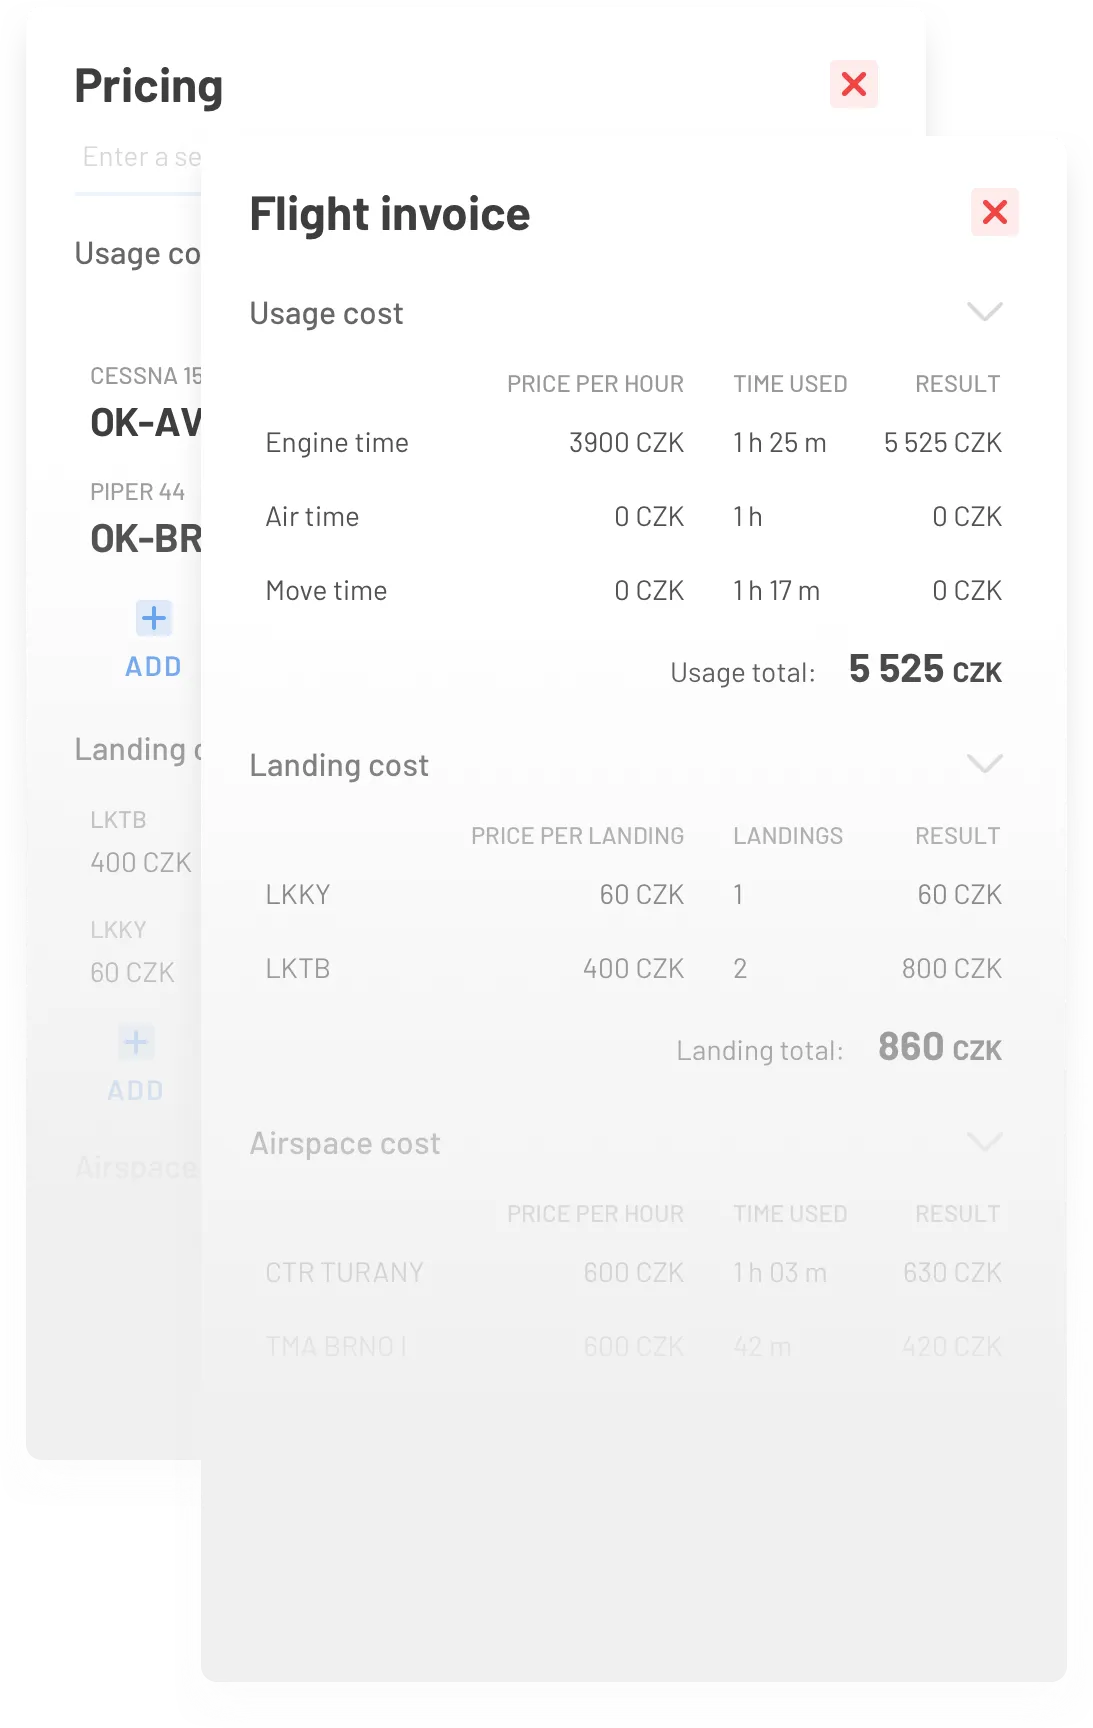 A flight invoice. Behind it a pricing component that drives the invoice’s prices.